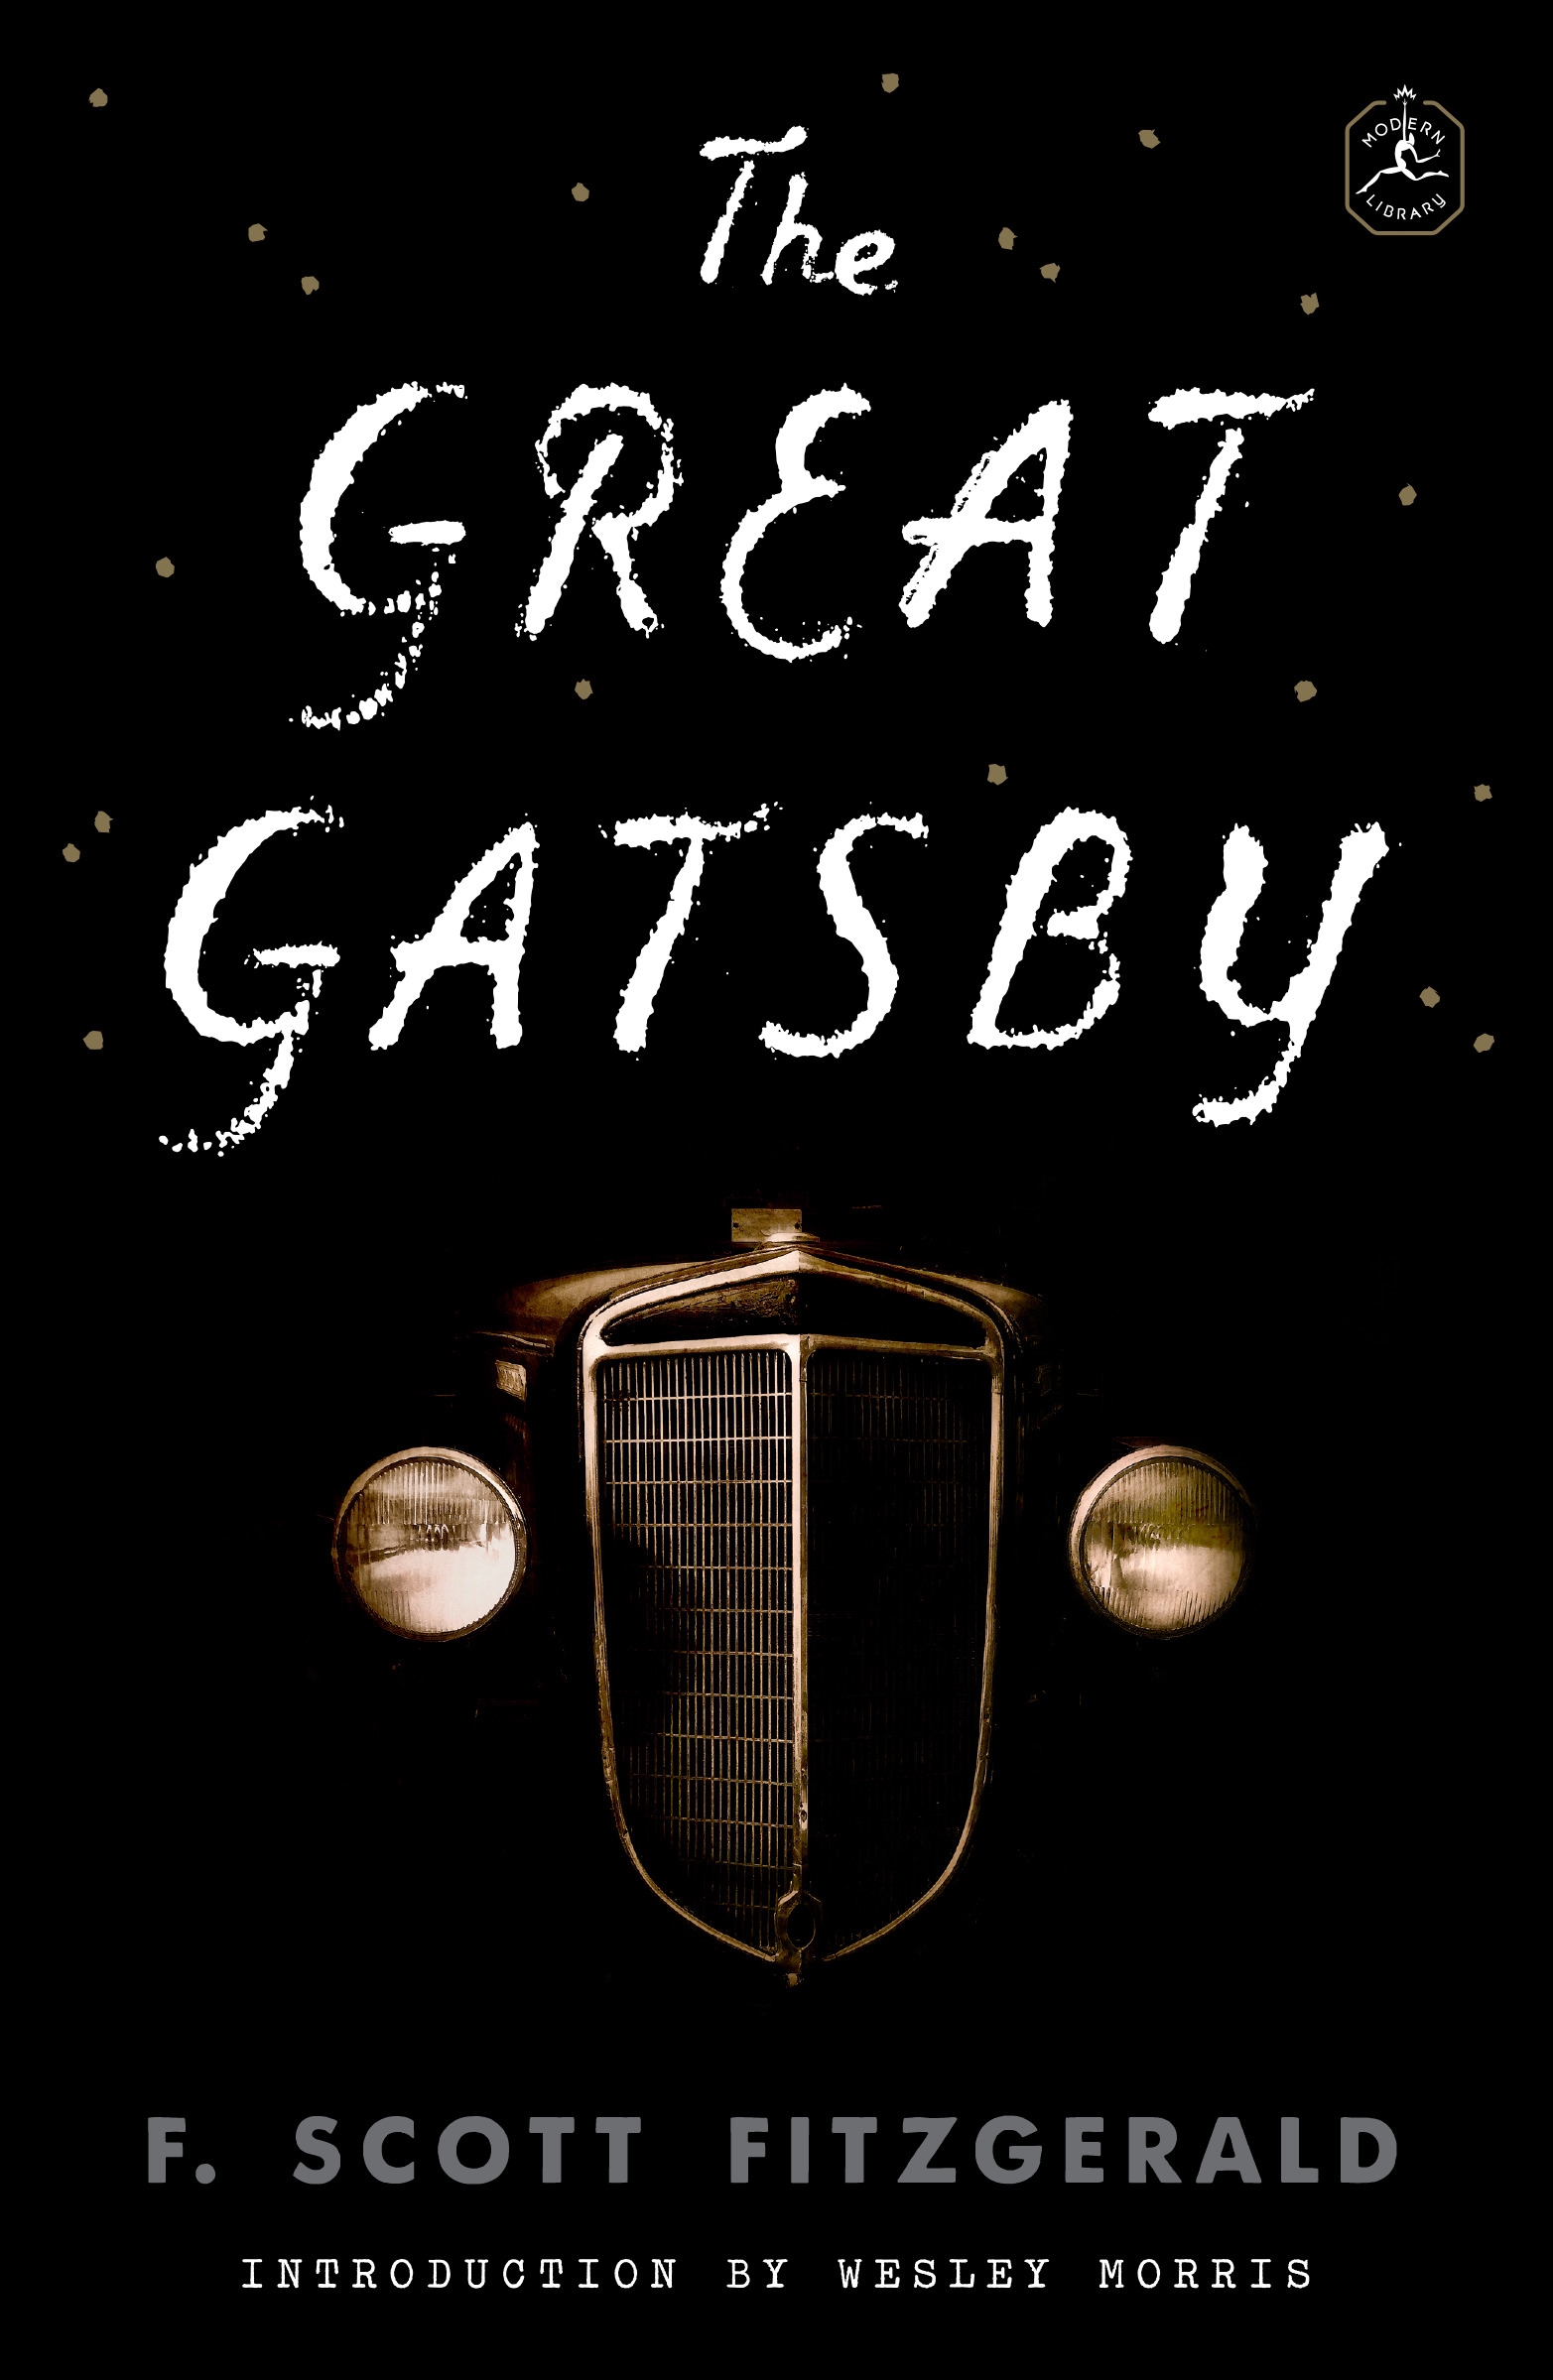 The Great Gatsby download the new version